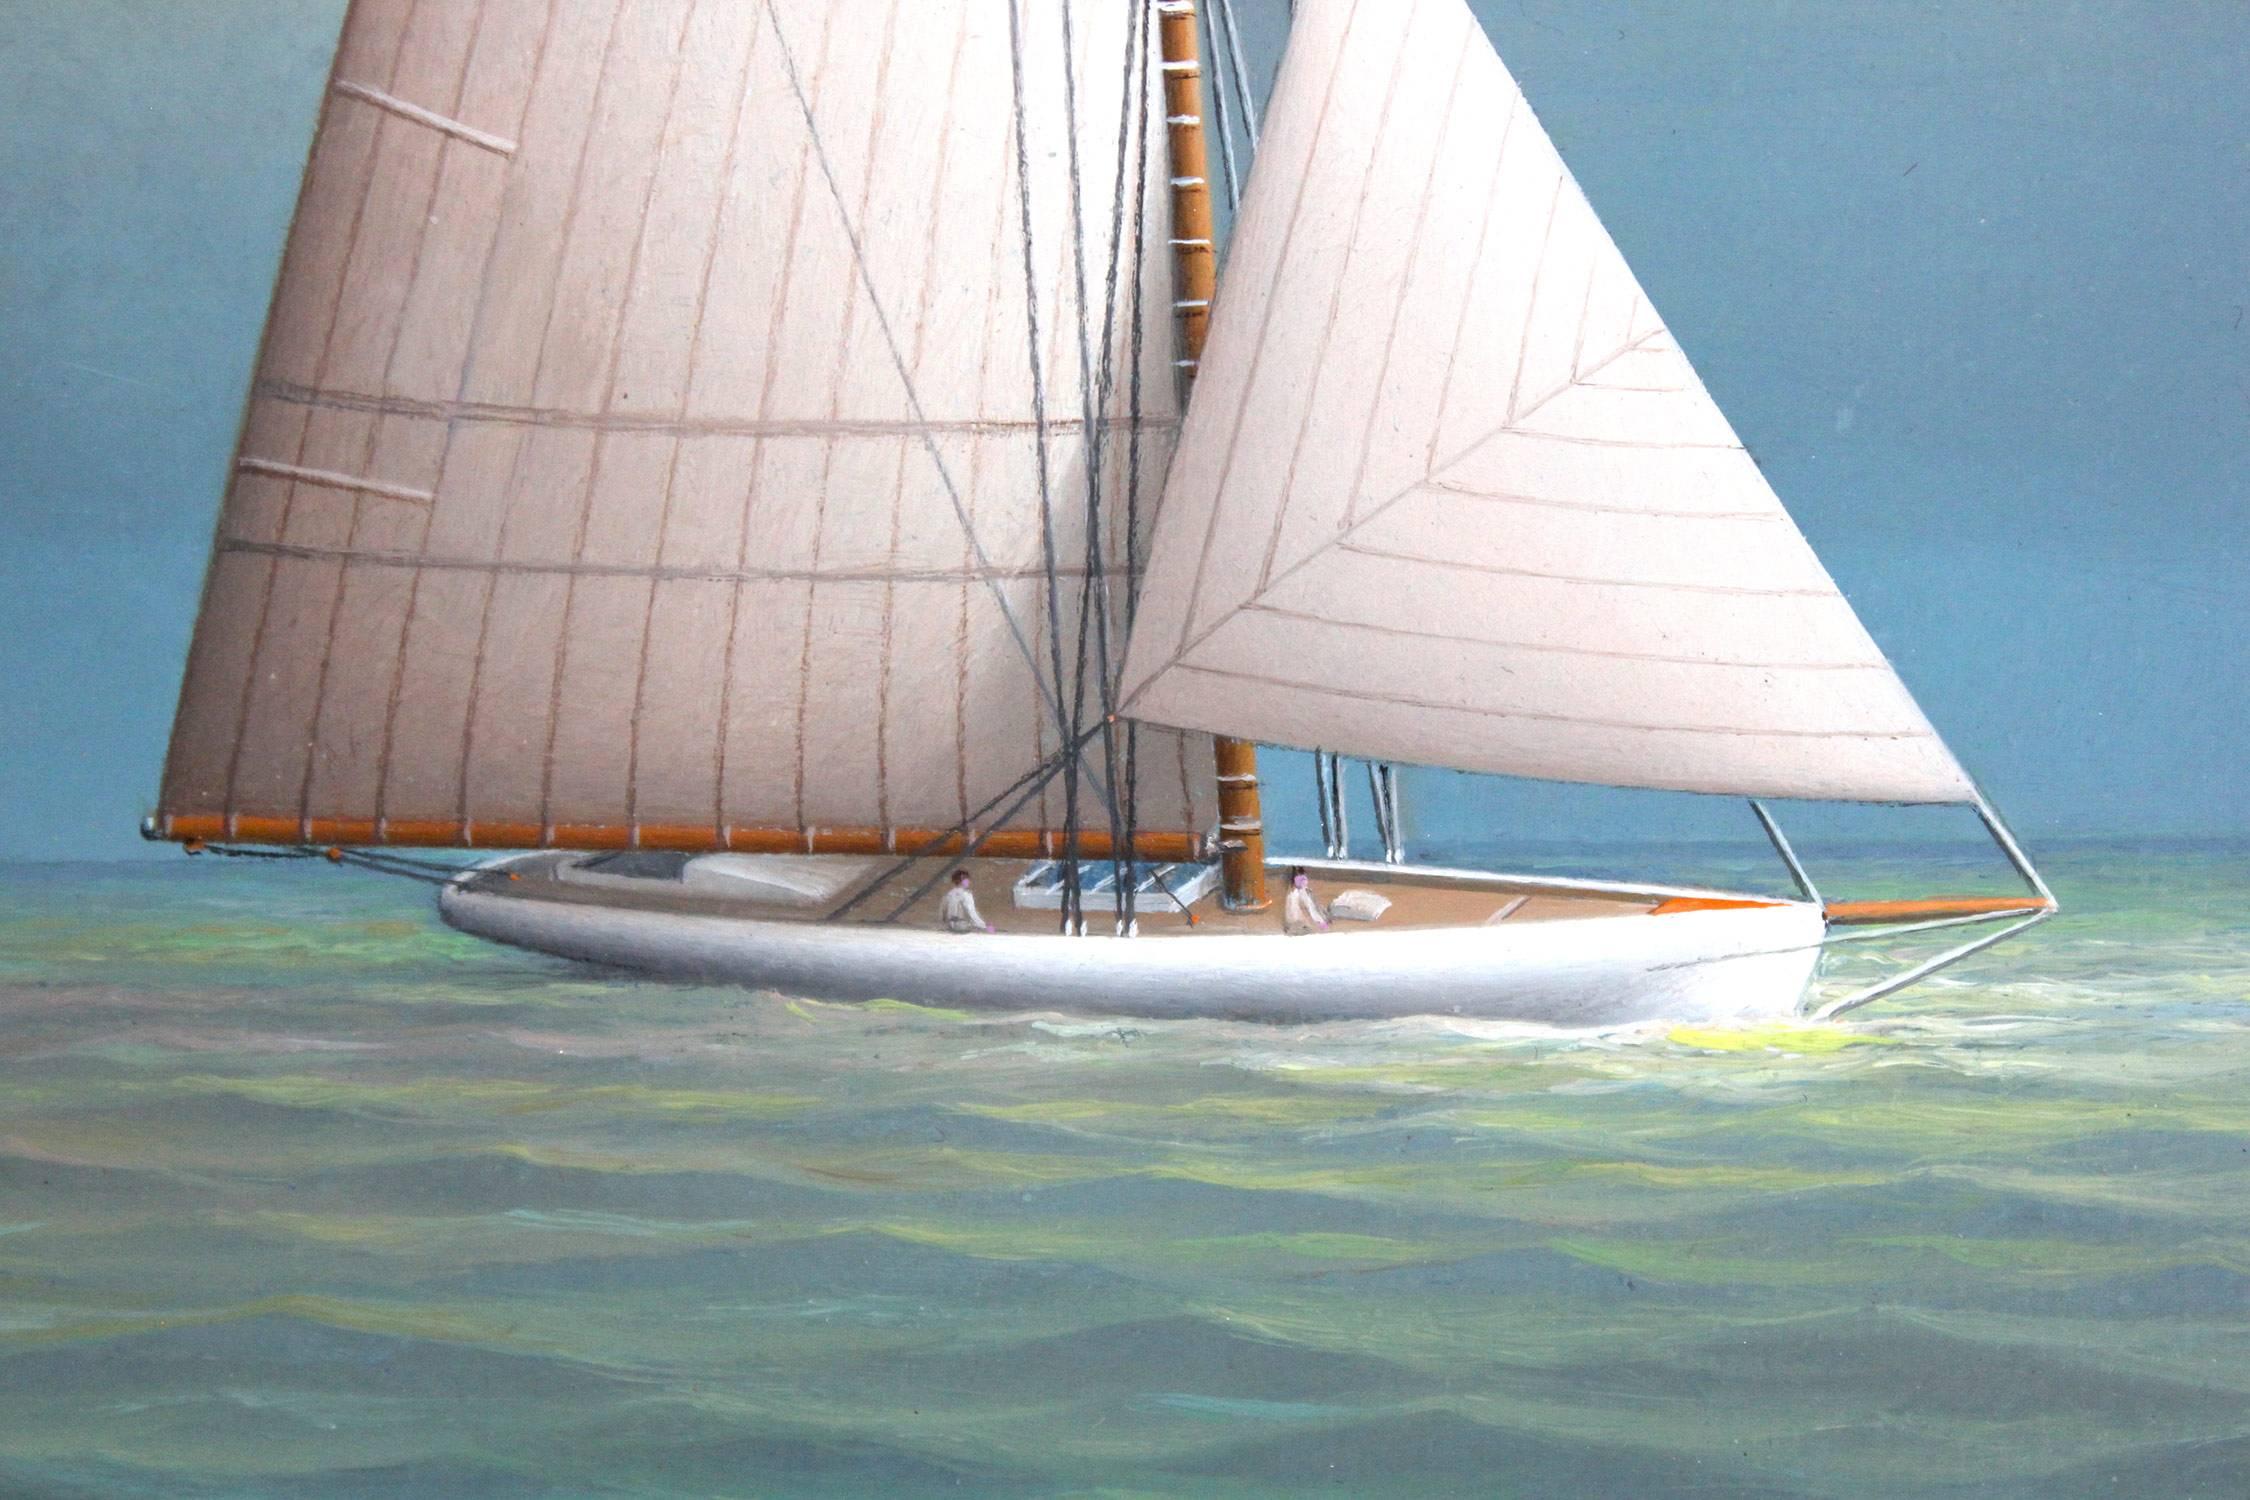 Sailing on the Pacific - Realist Painting by George Nemethy